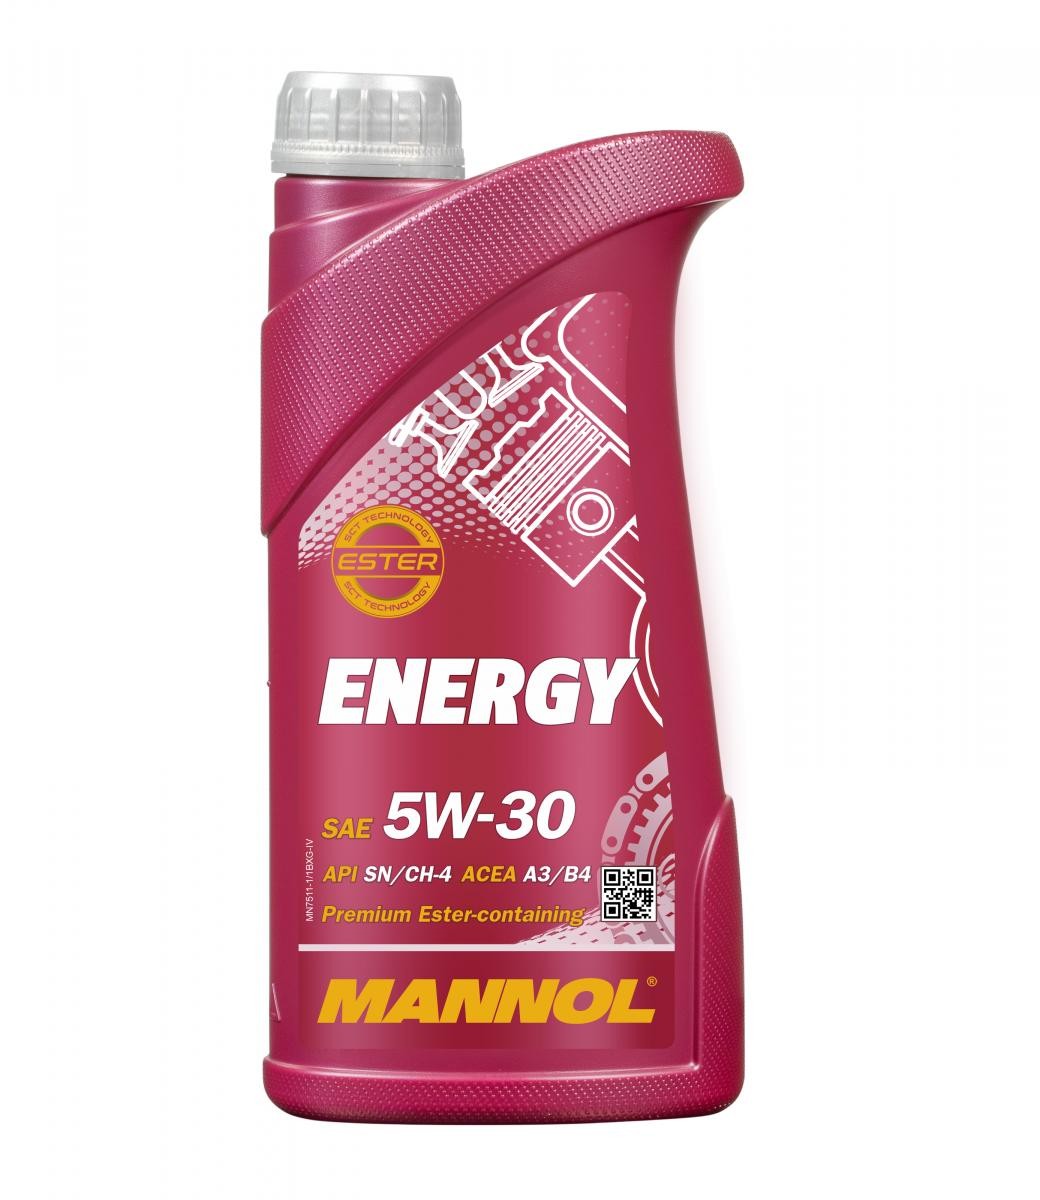 MANNOL ENERGY 5W-30, 1l, Part Synthetic Oil Motor oil MN7511-1 buy